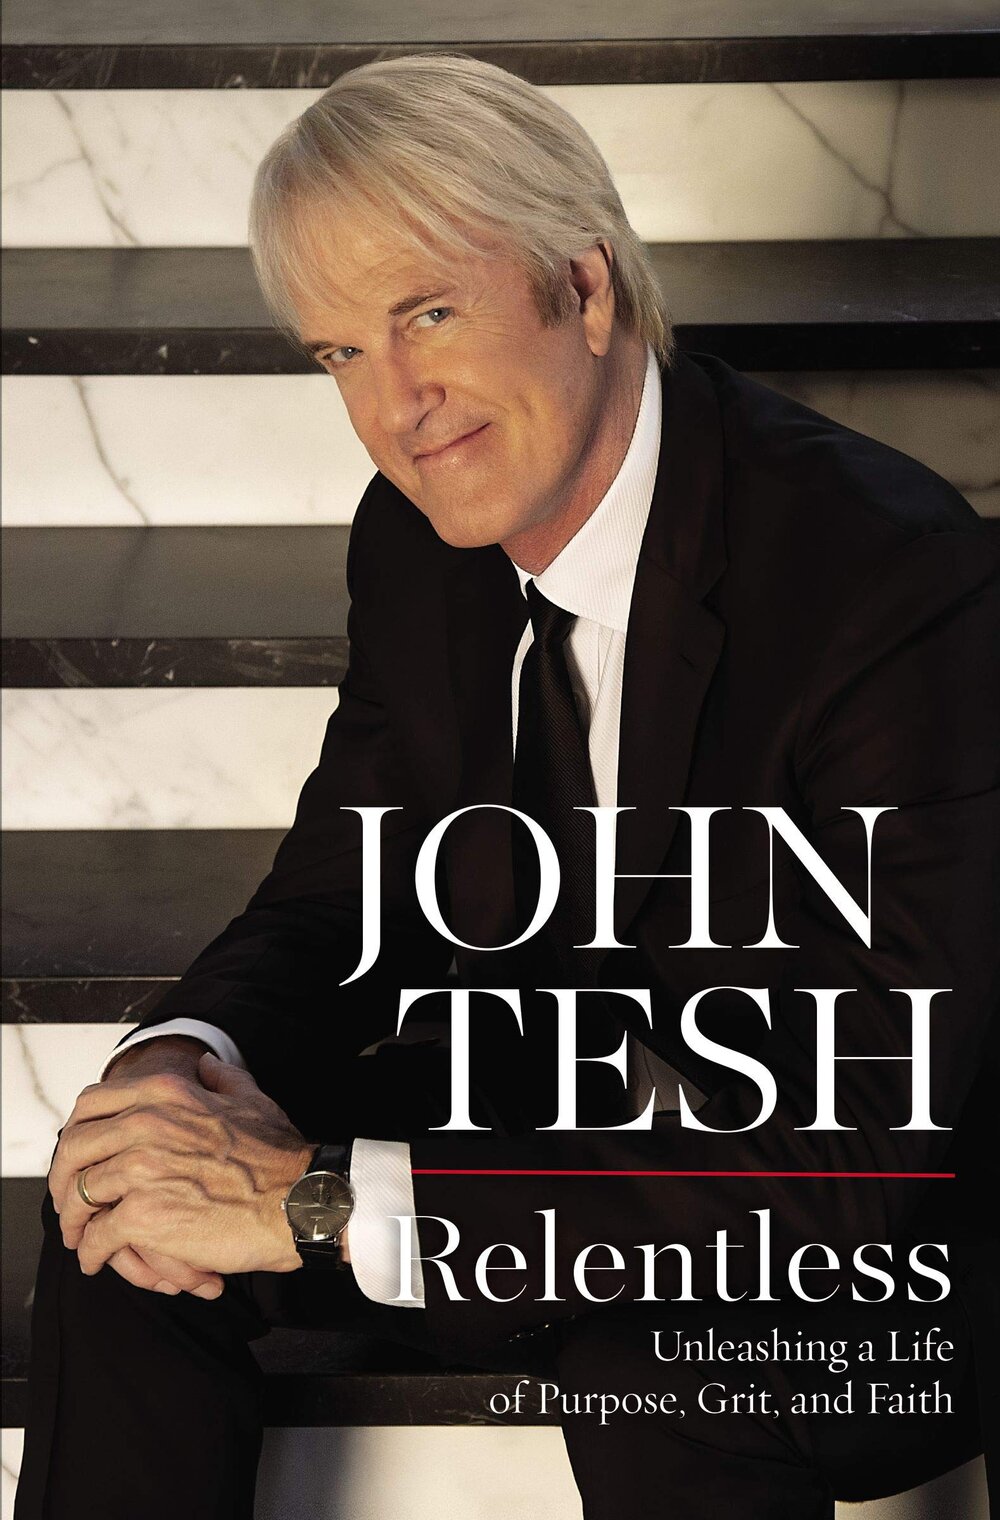 Relentless: Unleashing a Life of Purpose, Grit, and Faith by John Tesh